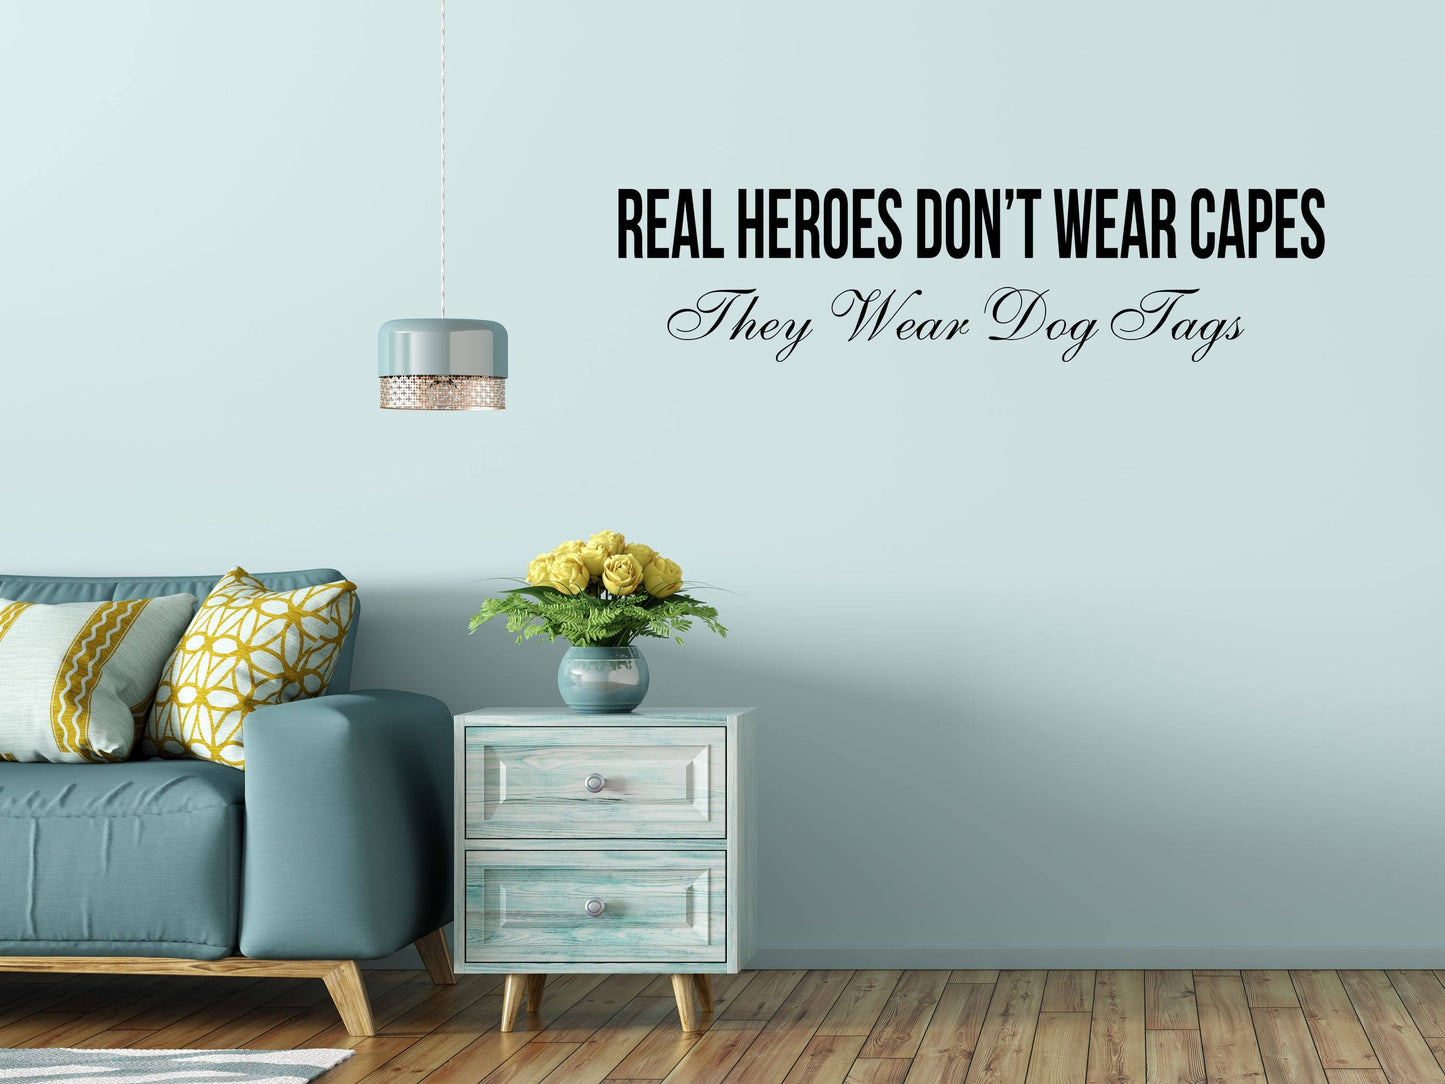 Real Heroes Don't Wear Capes Soldier - Inspirational Wall Decals Vinyl Wall Decal Inspirational Wall Signs 